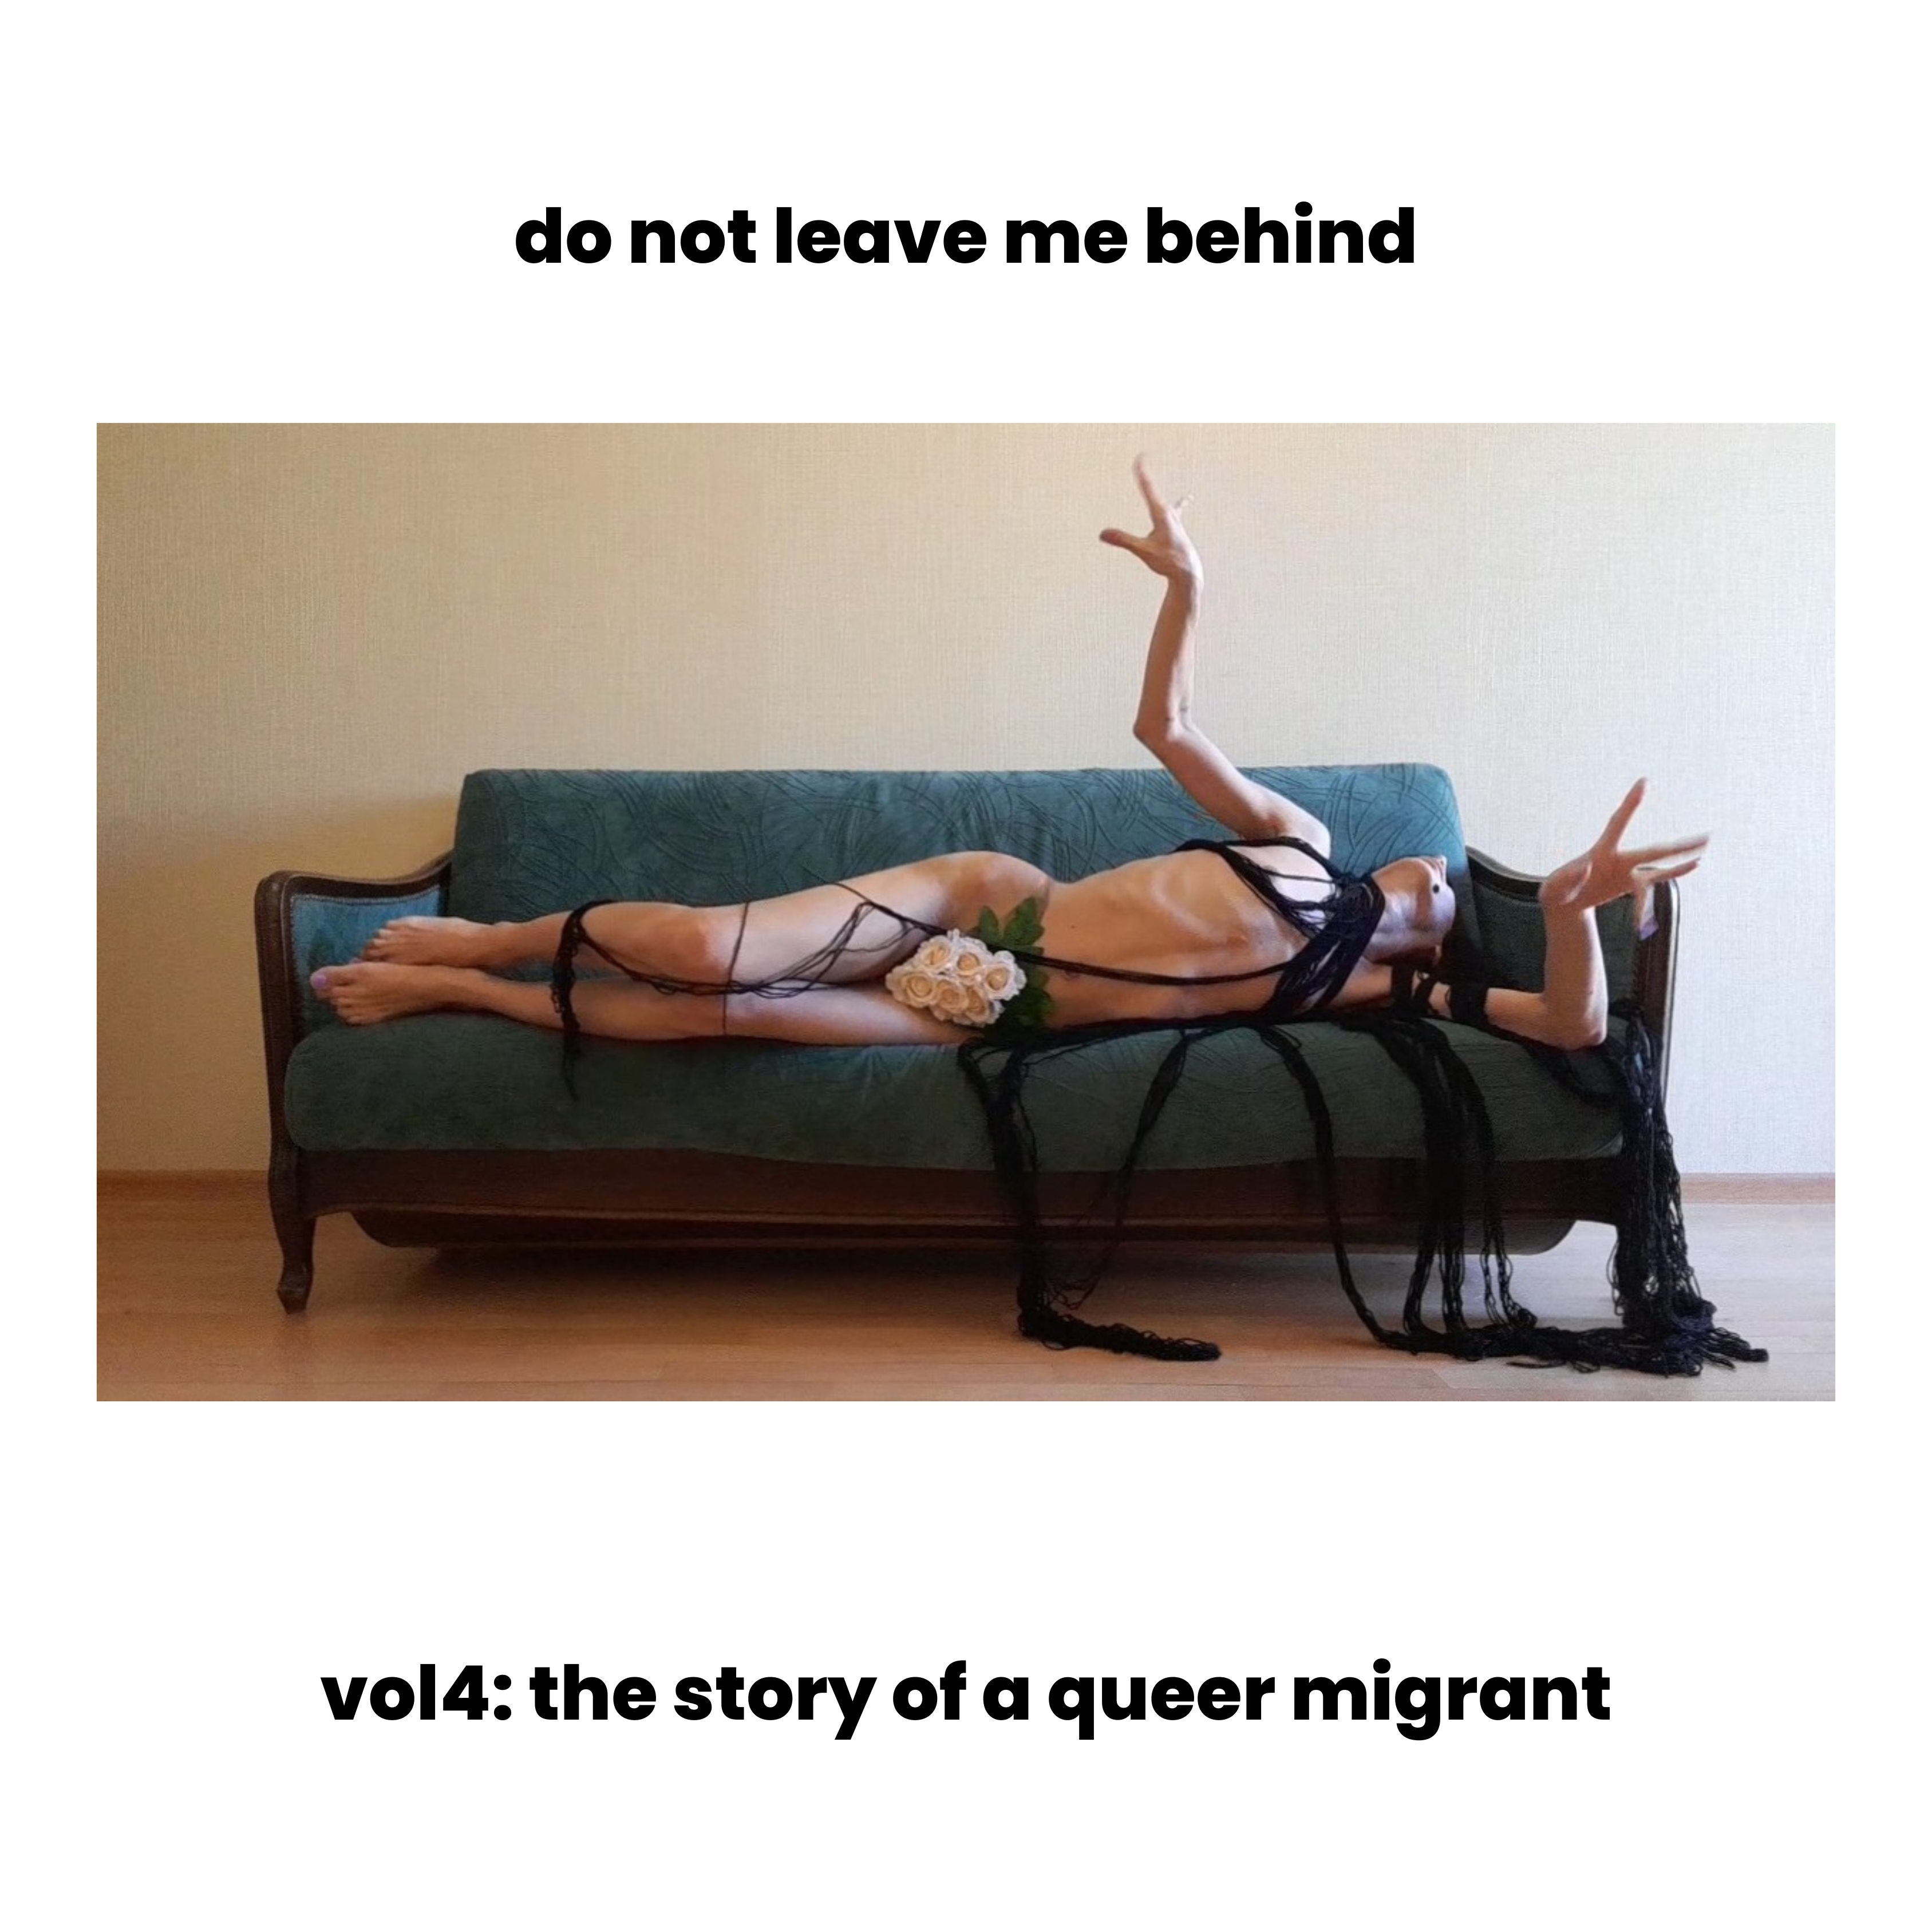 "Leave No One Behind" Group Exhibition

Vol4: do not leave ME behind: the story of a queer migrant